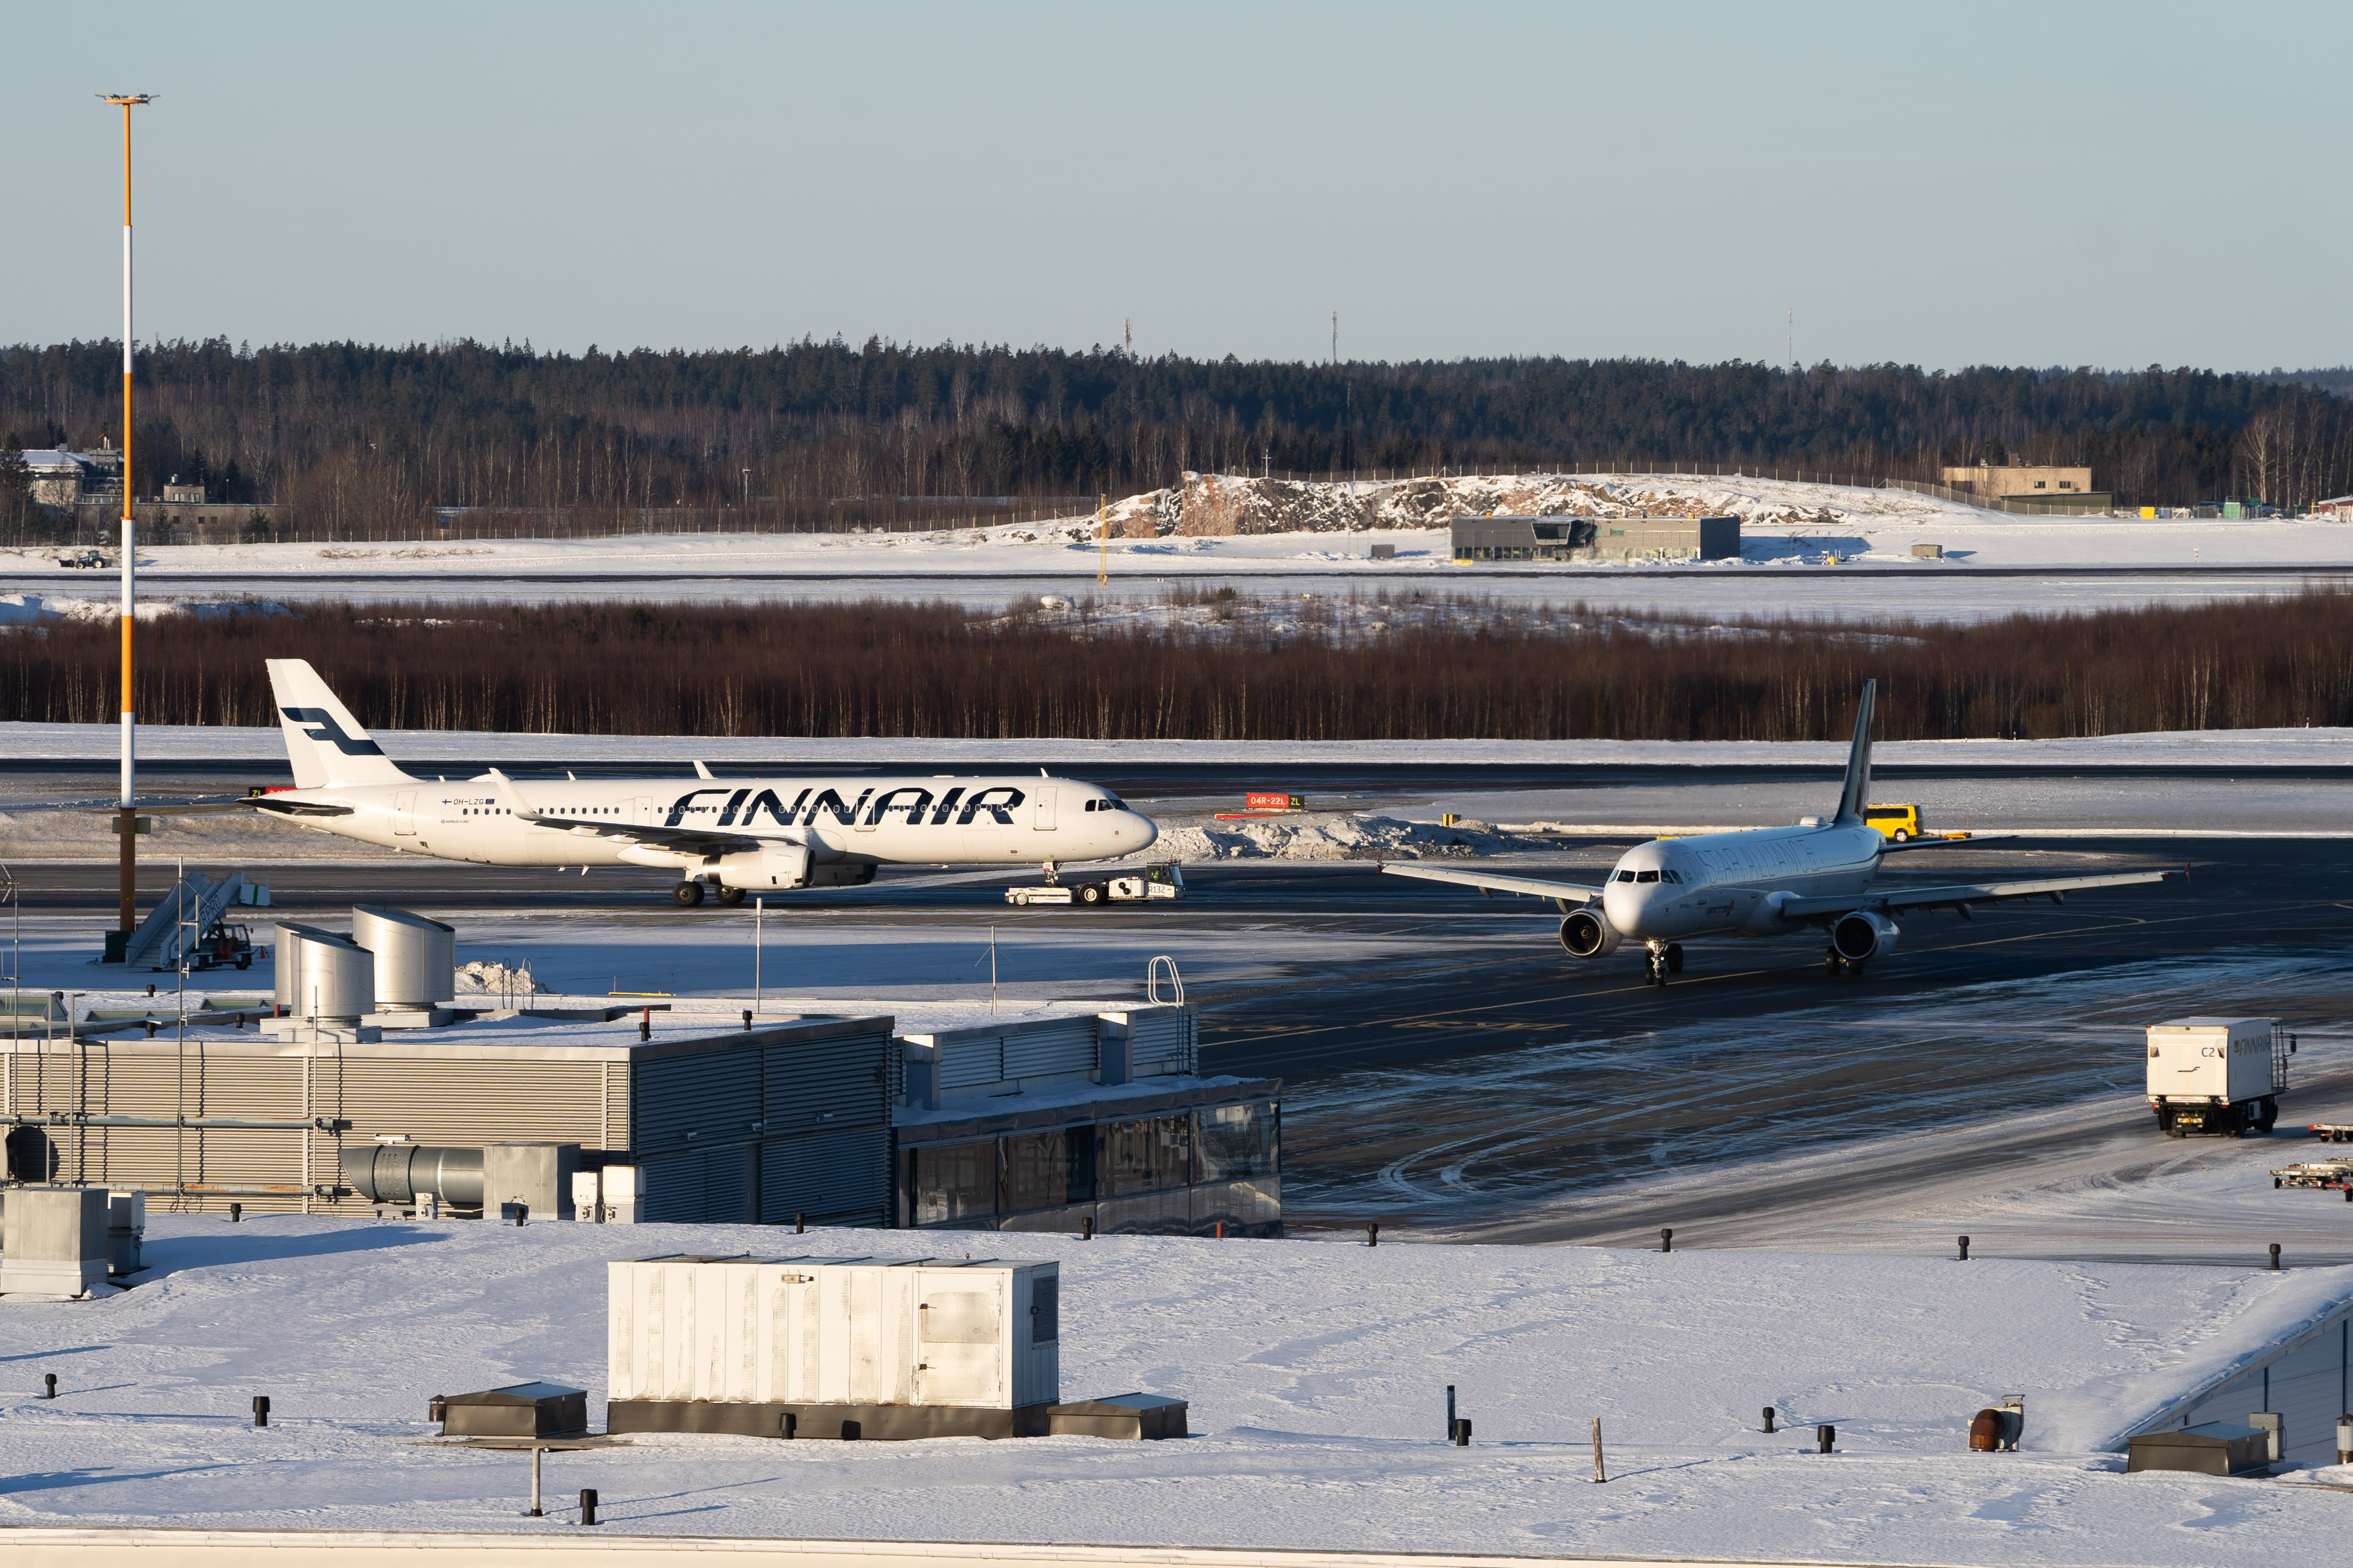 The consumer ombudsman scratches Finnair for “unclear” environmental advertising claims